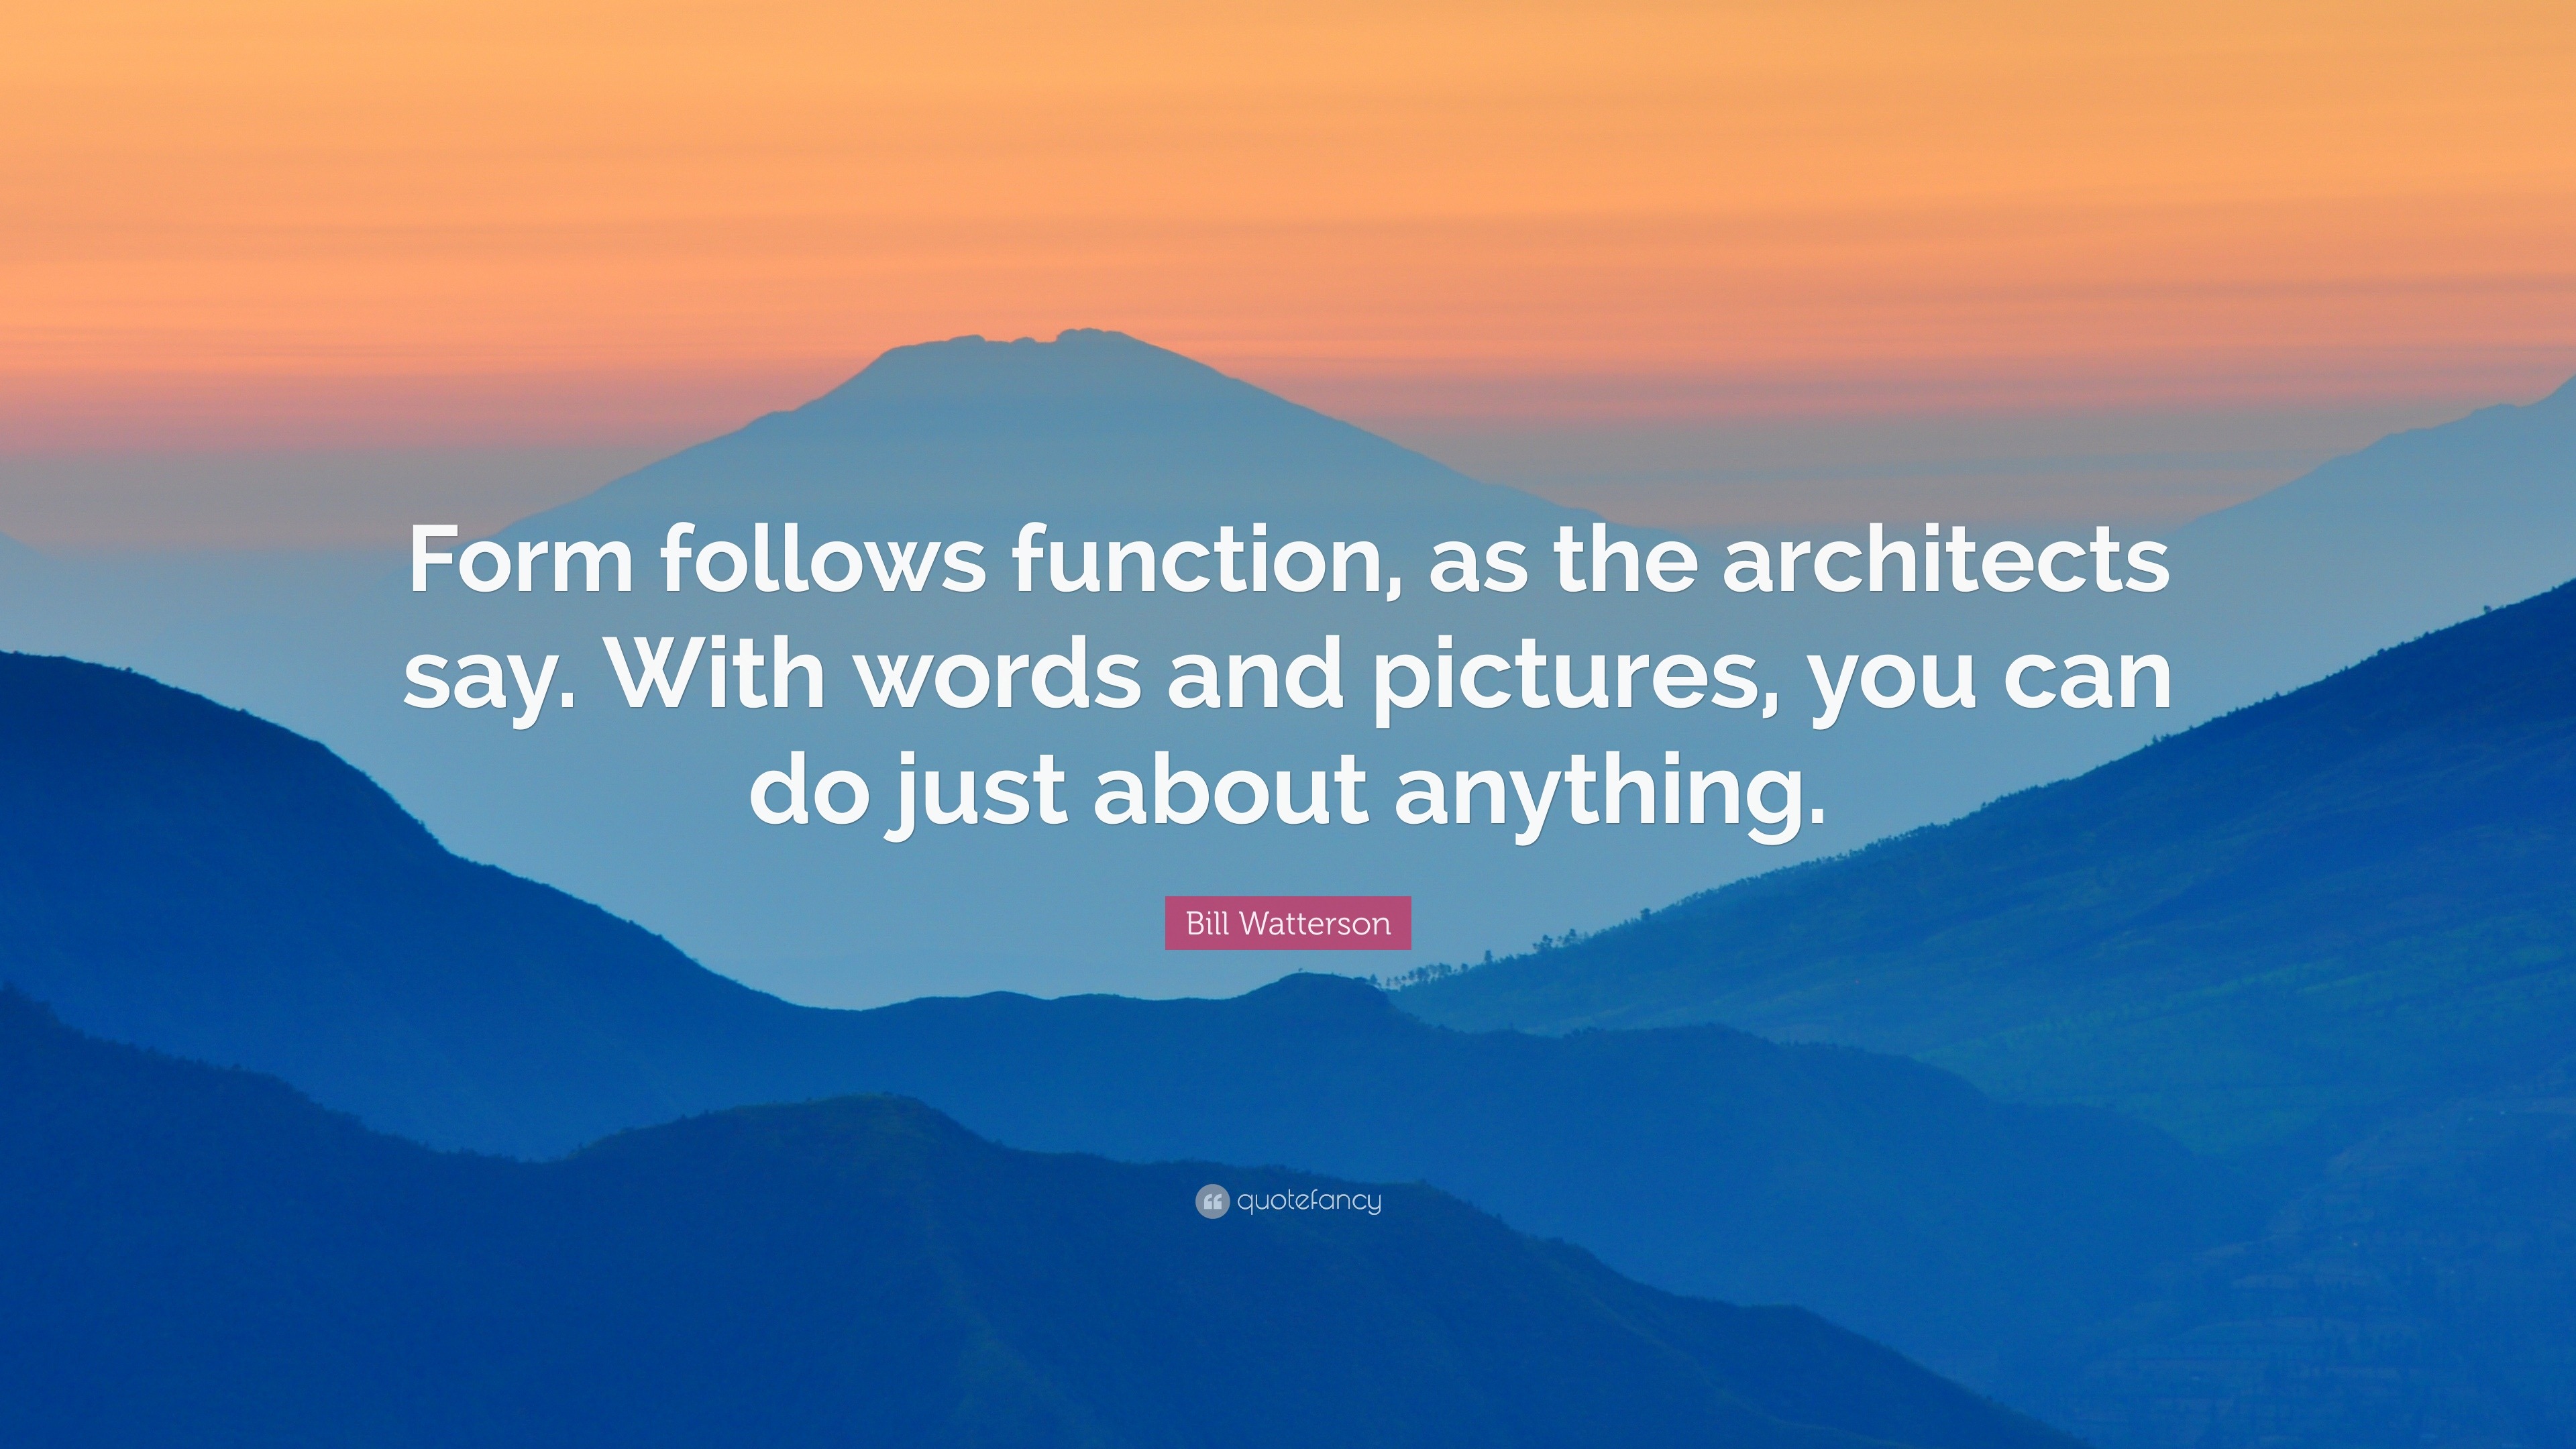 Bill Watterson Quote: “Form follows function, as the architects say ...